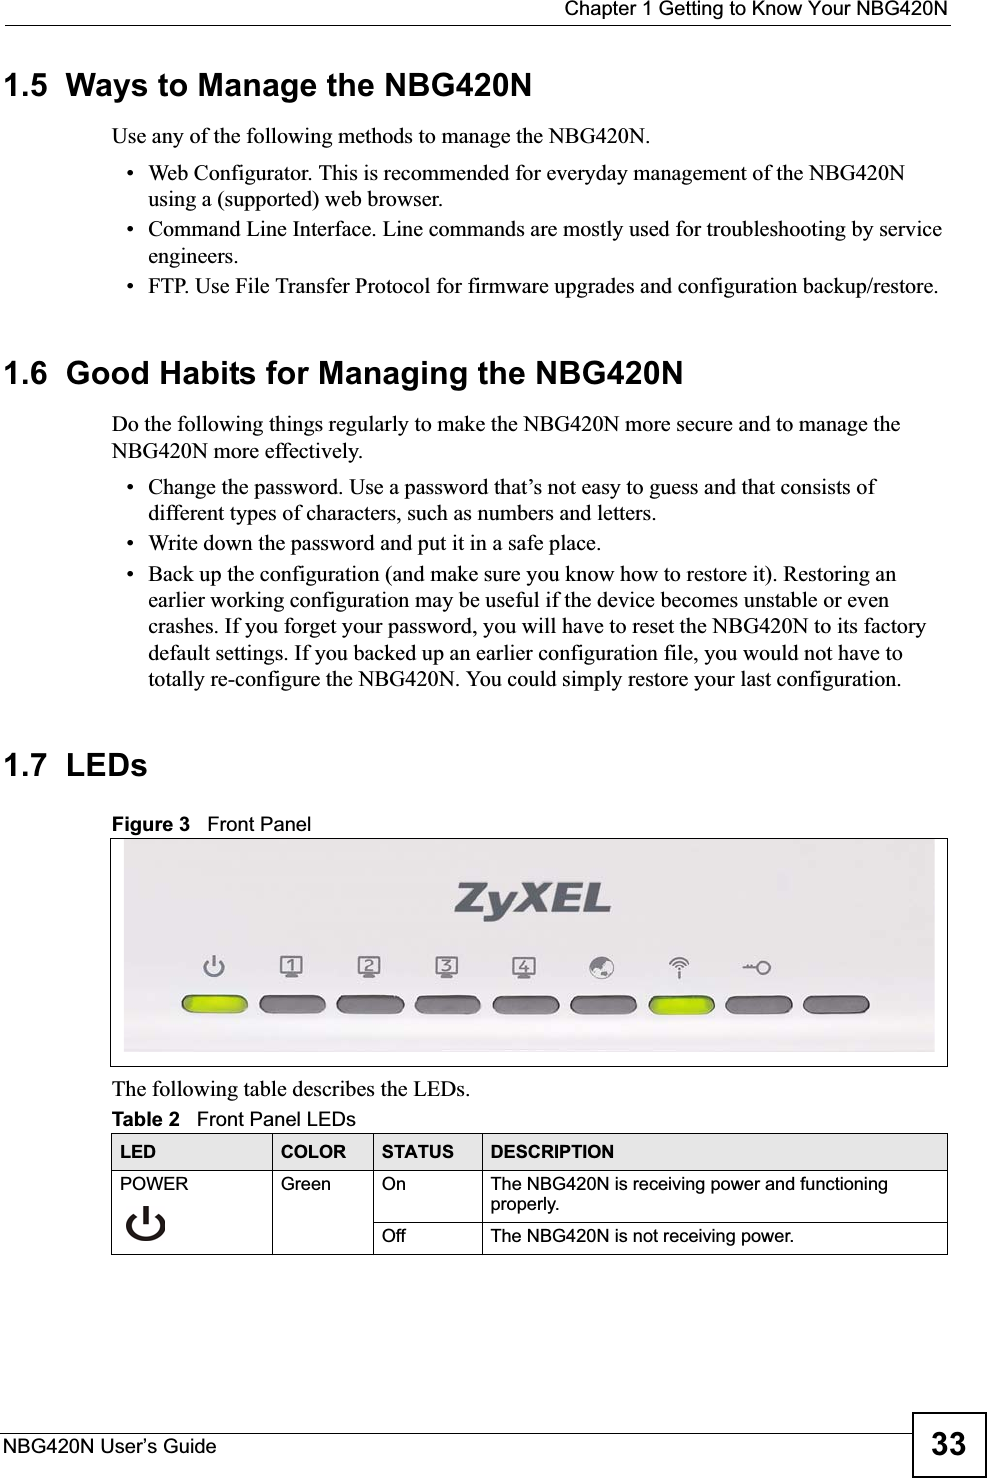  Chapter 1 Getting to Know Your NBG420NNBG420N User’s Guide 331.5  Ways to Manage the NBG420NUse any of the following methods to manage the NBG420N.• Web Configurator. This is recommended for everyday management of the NBG420N using a (supported) web browser. • Command Line Interface. Line commands are mostly used for troubleshooting by service engineers.  • FTP. Use File Transfer Protocol for firmware upgrades and configuration backup/restore.1.6  Good Habits for Managing the NBG420NDo the following things regularly to make the NBG420N more secure and to manage the NBG420N more effectively.• Change the password. Use a password that’s not easy to guess and that consists of different types of characters, such as numbers and letters.• Write down the password and put it in a safe place.• Back up the configuration (and make sure you know how to restore it). Restoring an earlier working configuration may be useful if the device becomes unstable or even crashes. If you forget your password, you will have to reset the NBG420N to its factory default settings. If you backed up an earlier configuration file, you would not have to totally re-configure the NBG420N. You could simply restore your last configuration.1.7  LEDsFigure 3   Front PanelThe following table describes the LEDs.Table 2   Front Panel LEDsLED COLOR STATUS DESCRIPTIONPOWER Green On The NBG420N is receiving power and functioning properly. Off The NBG420N is not receiving power.